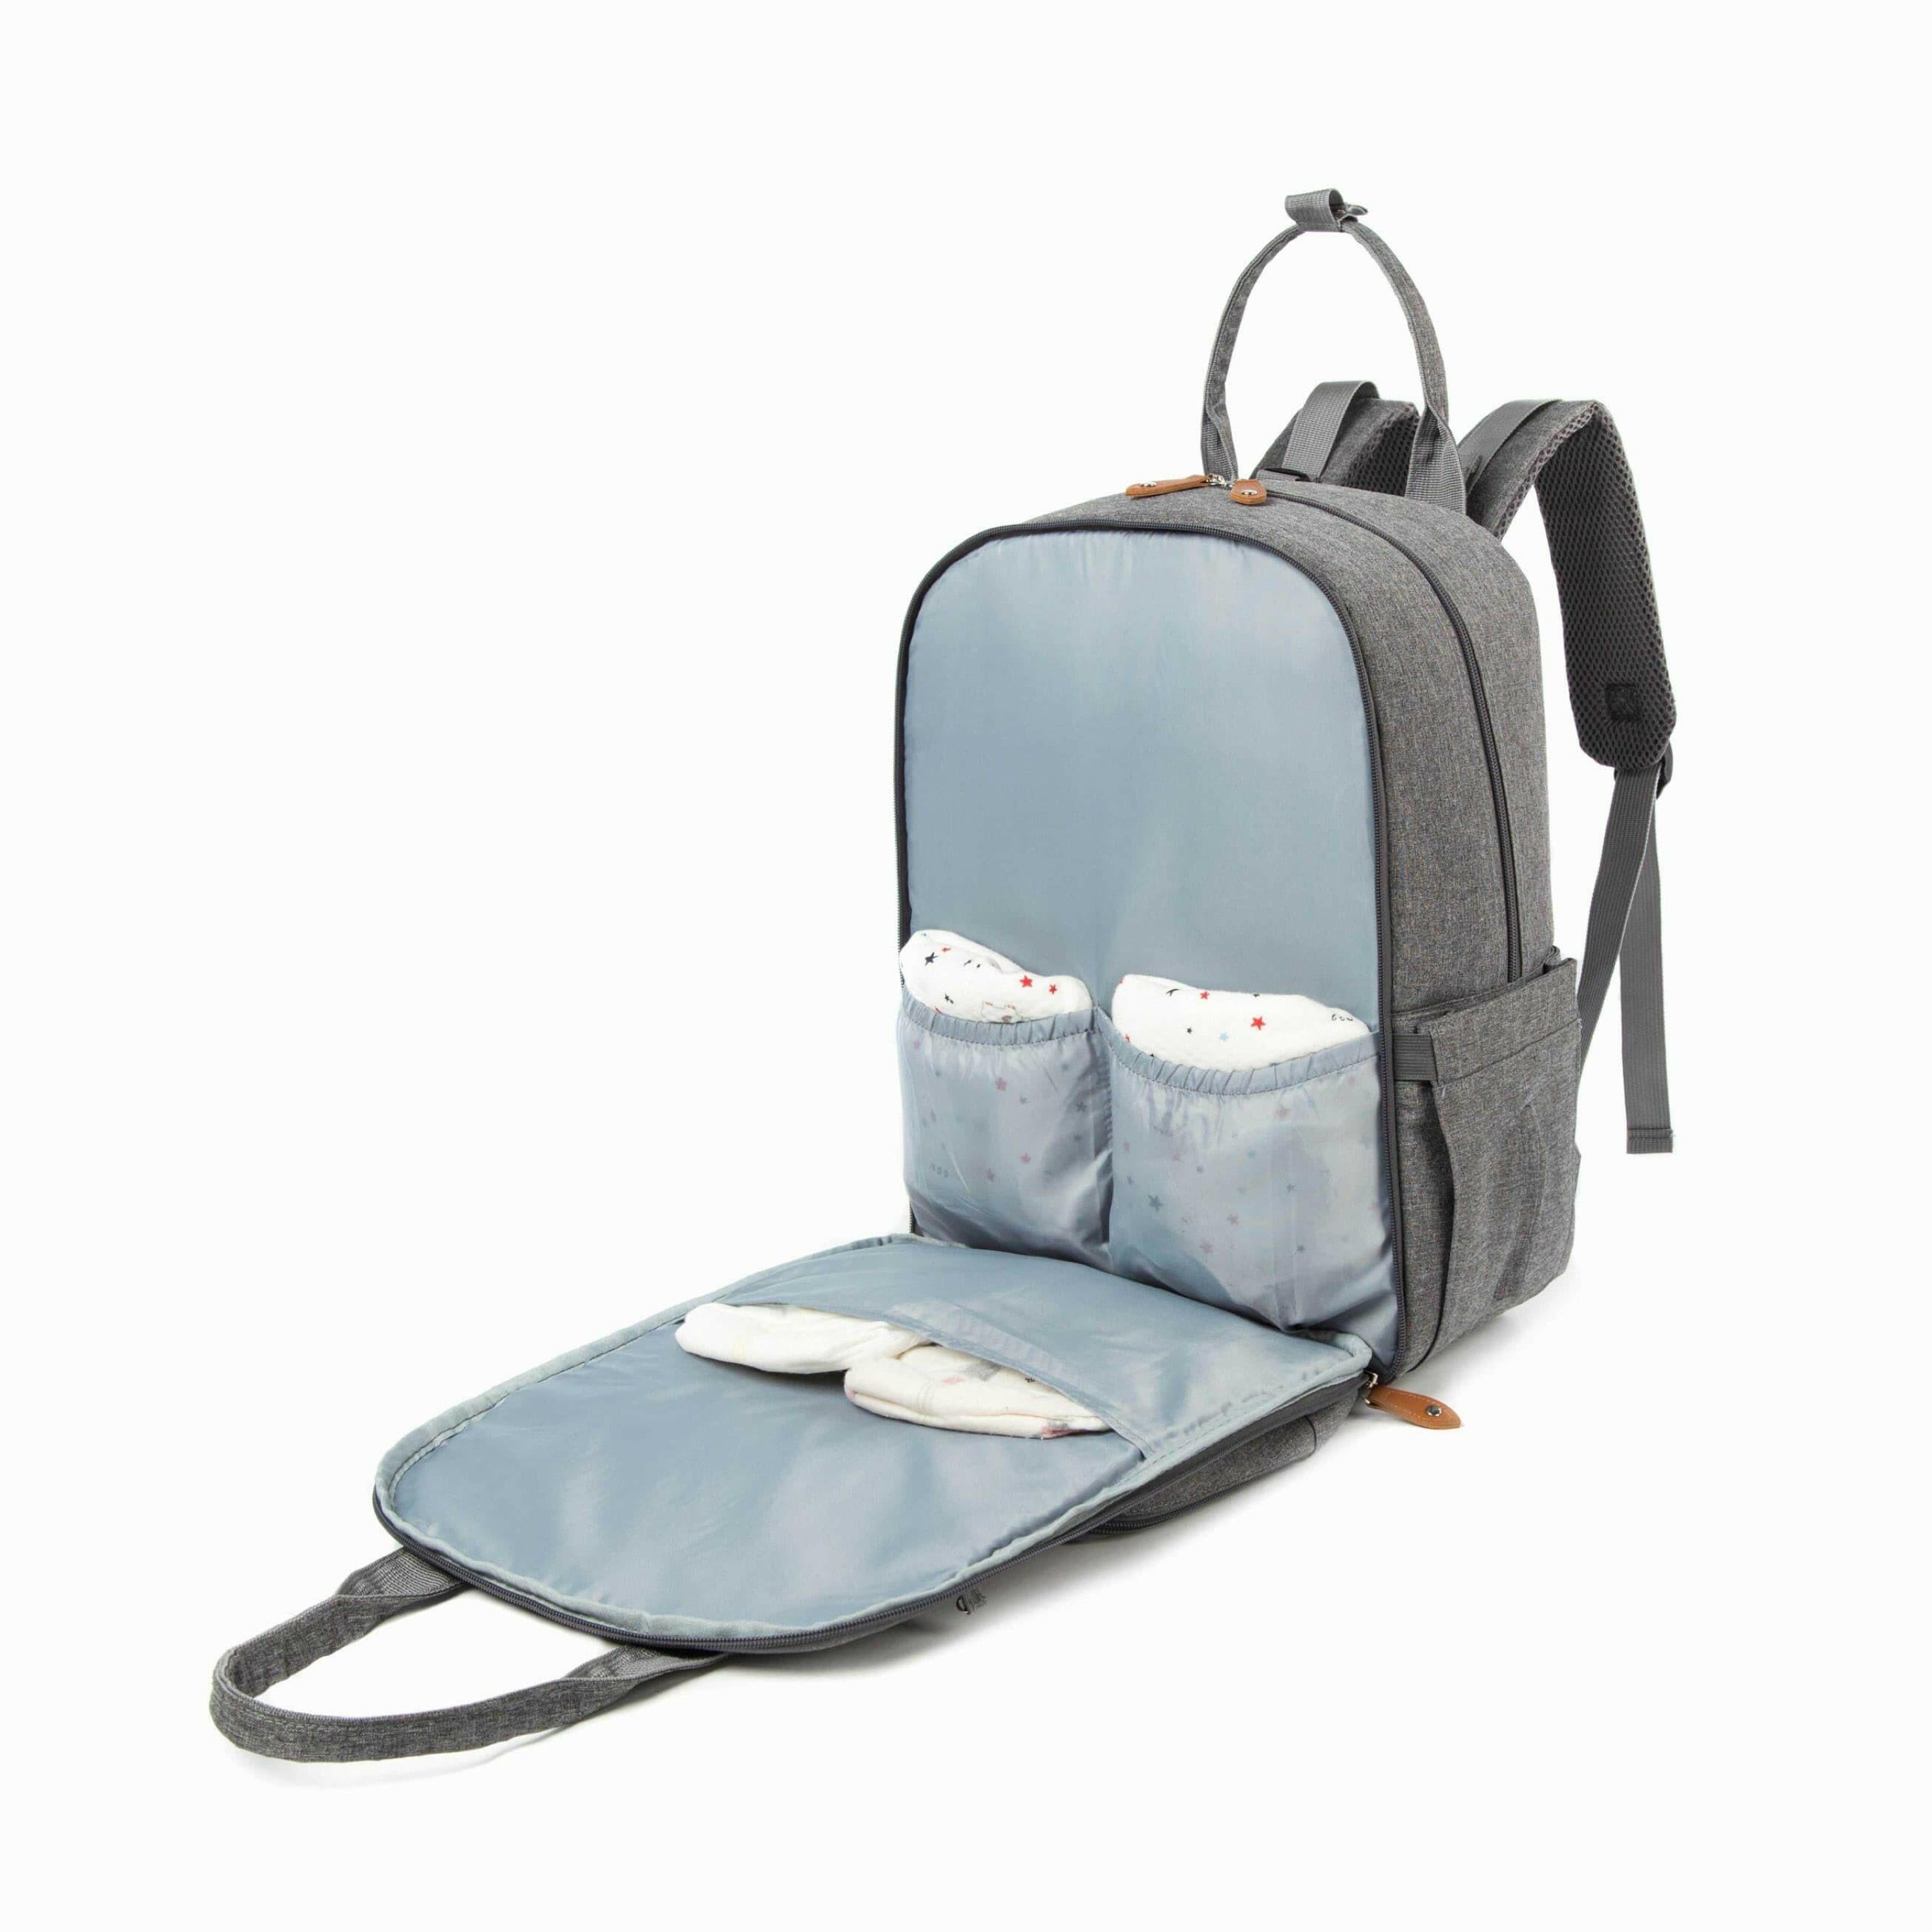 Baby Diaper bag backpack with changing pad.